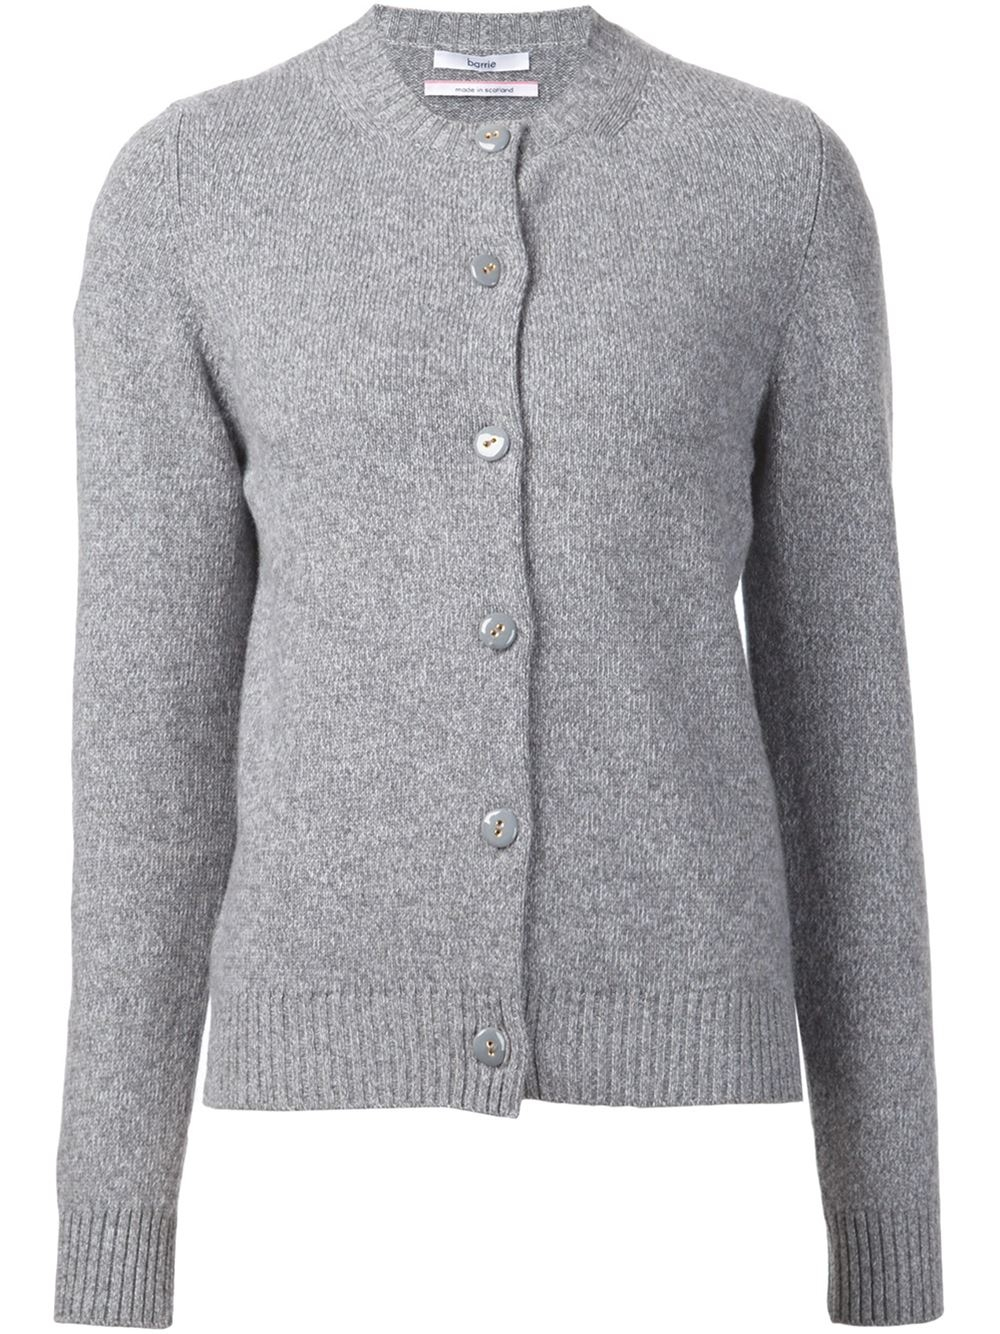 Barrie Elbow Patch Cardigan Sweater in Gray (Grey) | Lyst